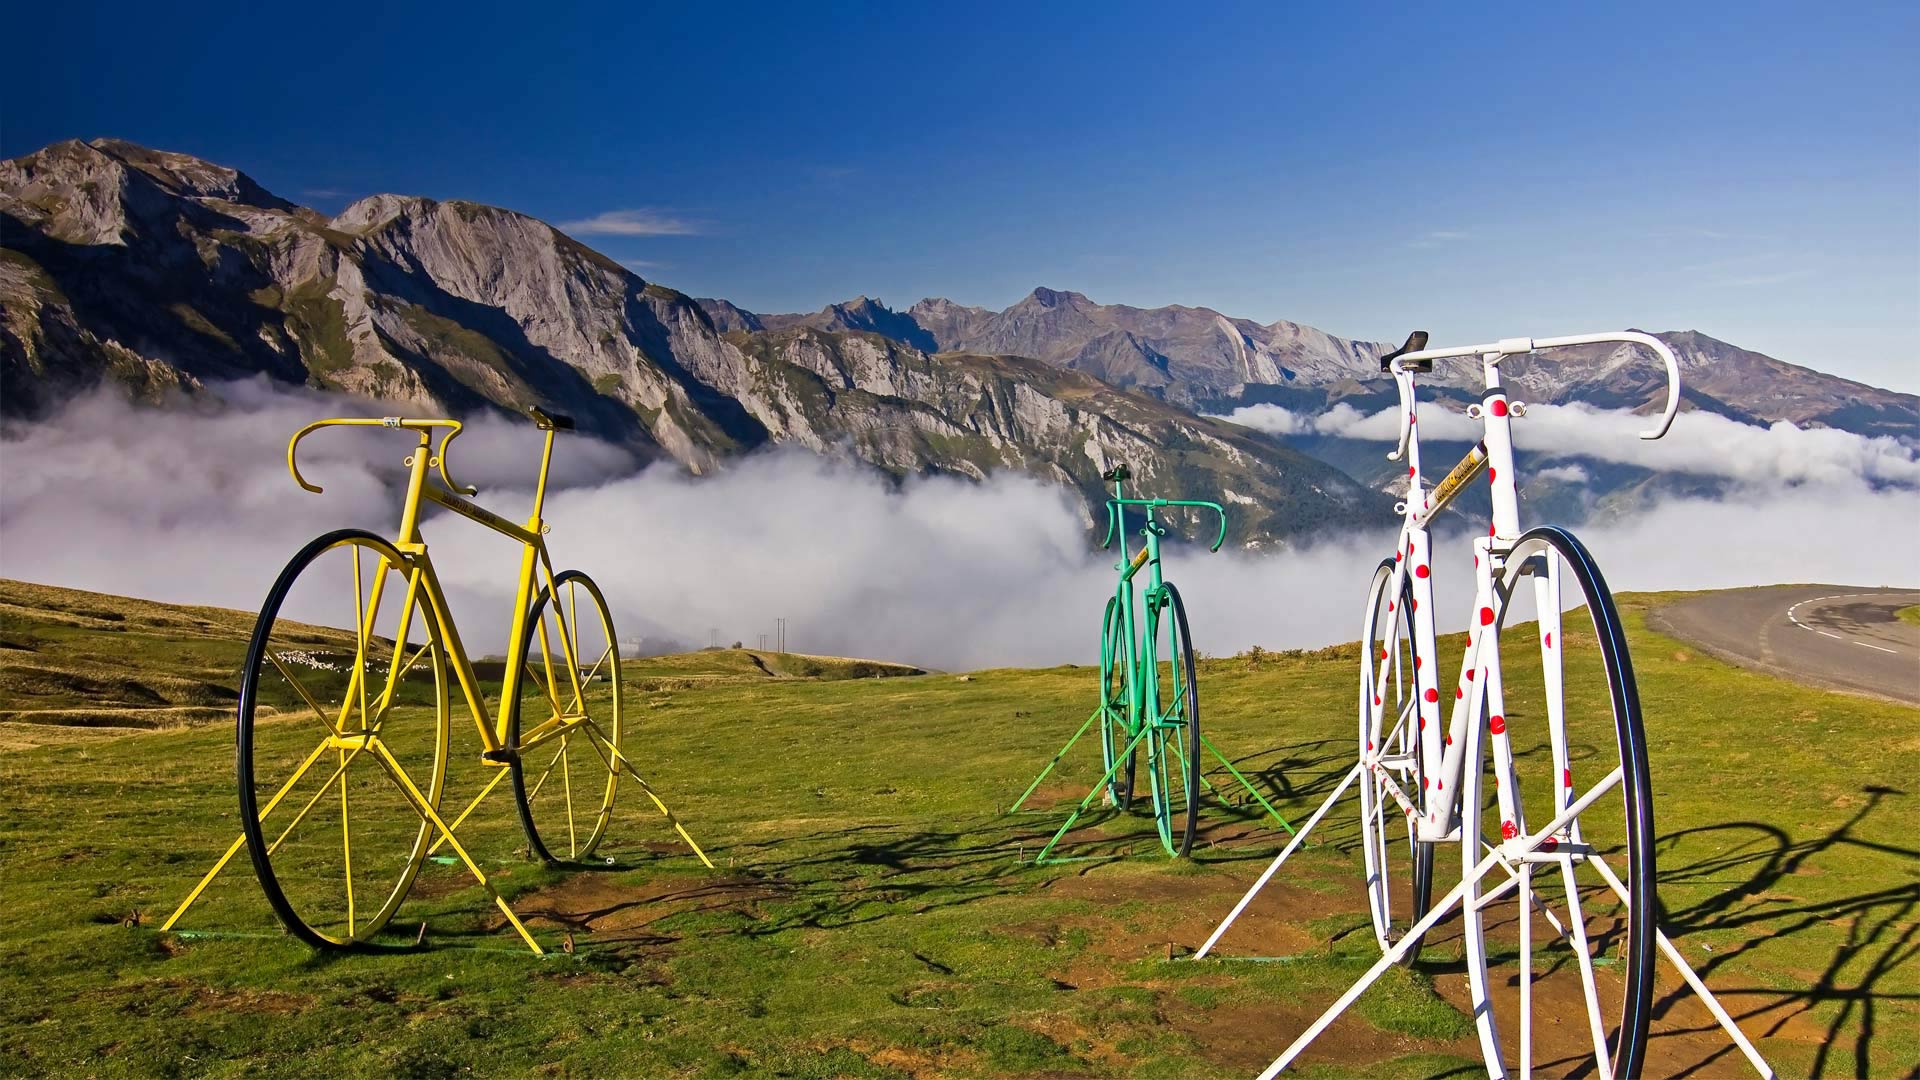 Bicycle sculptures at the Col d'Aubisque, Hautes Pyrenees, France - Fco. Javier Sobrino/age fotostock)